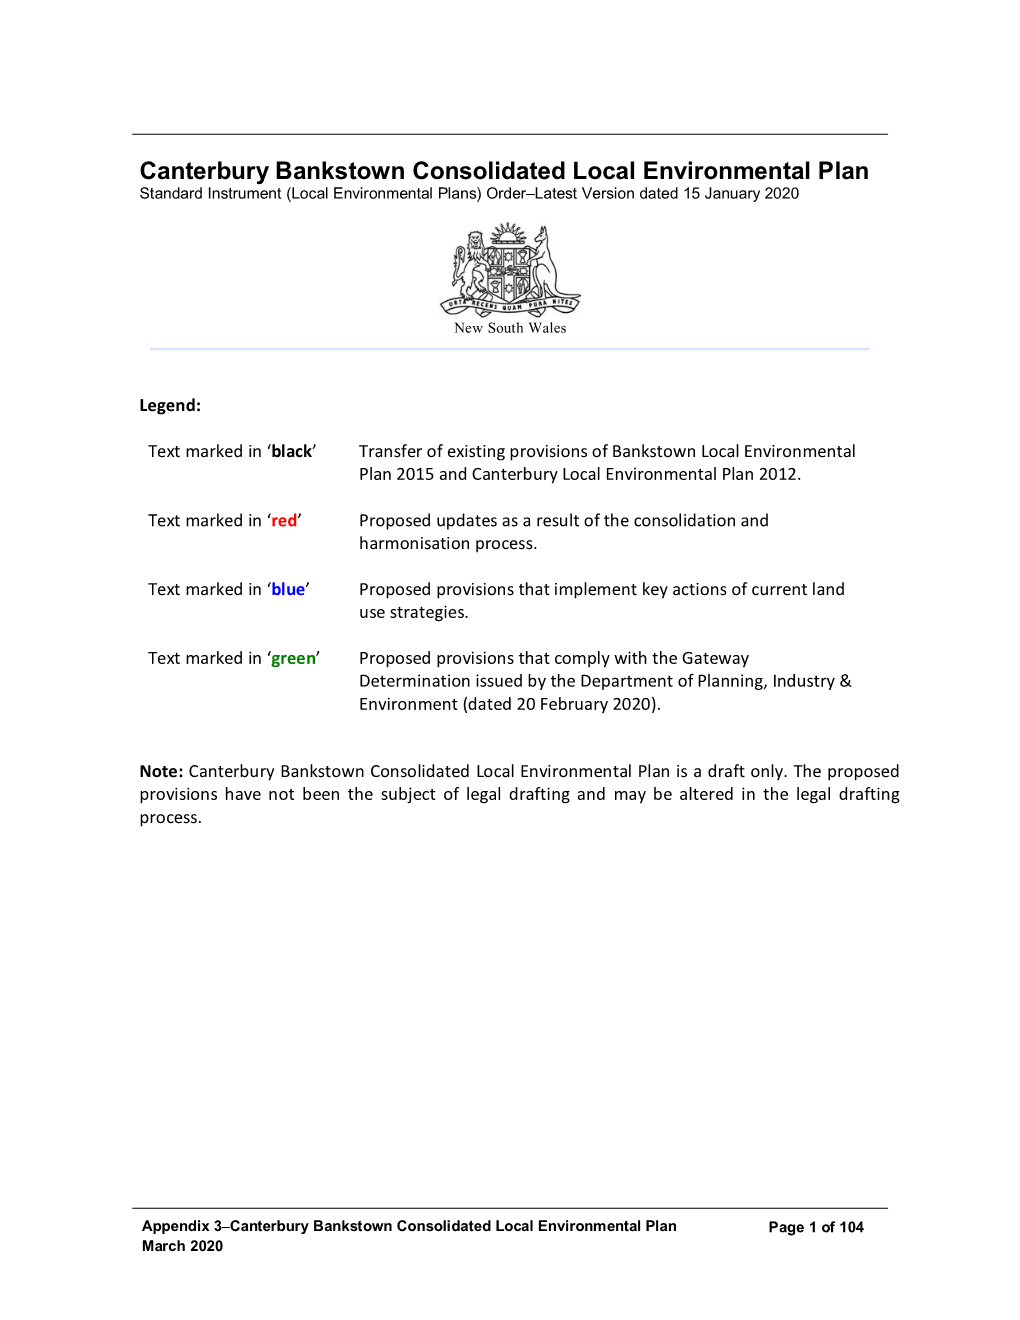 Canterbury Bankstown Consolidated Local Environmental Plan Standard Instrument (Local Environmental Plans) Order–Latest Version Dated 15 January 2020